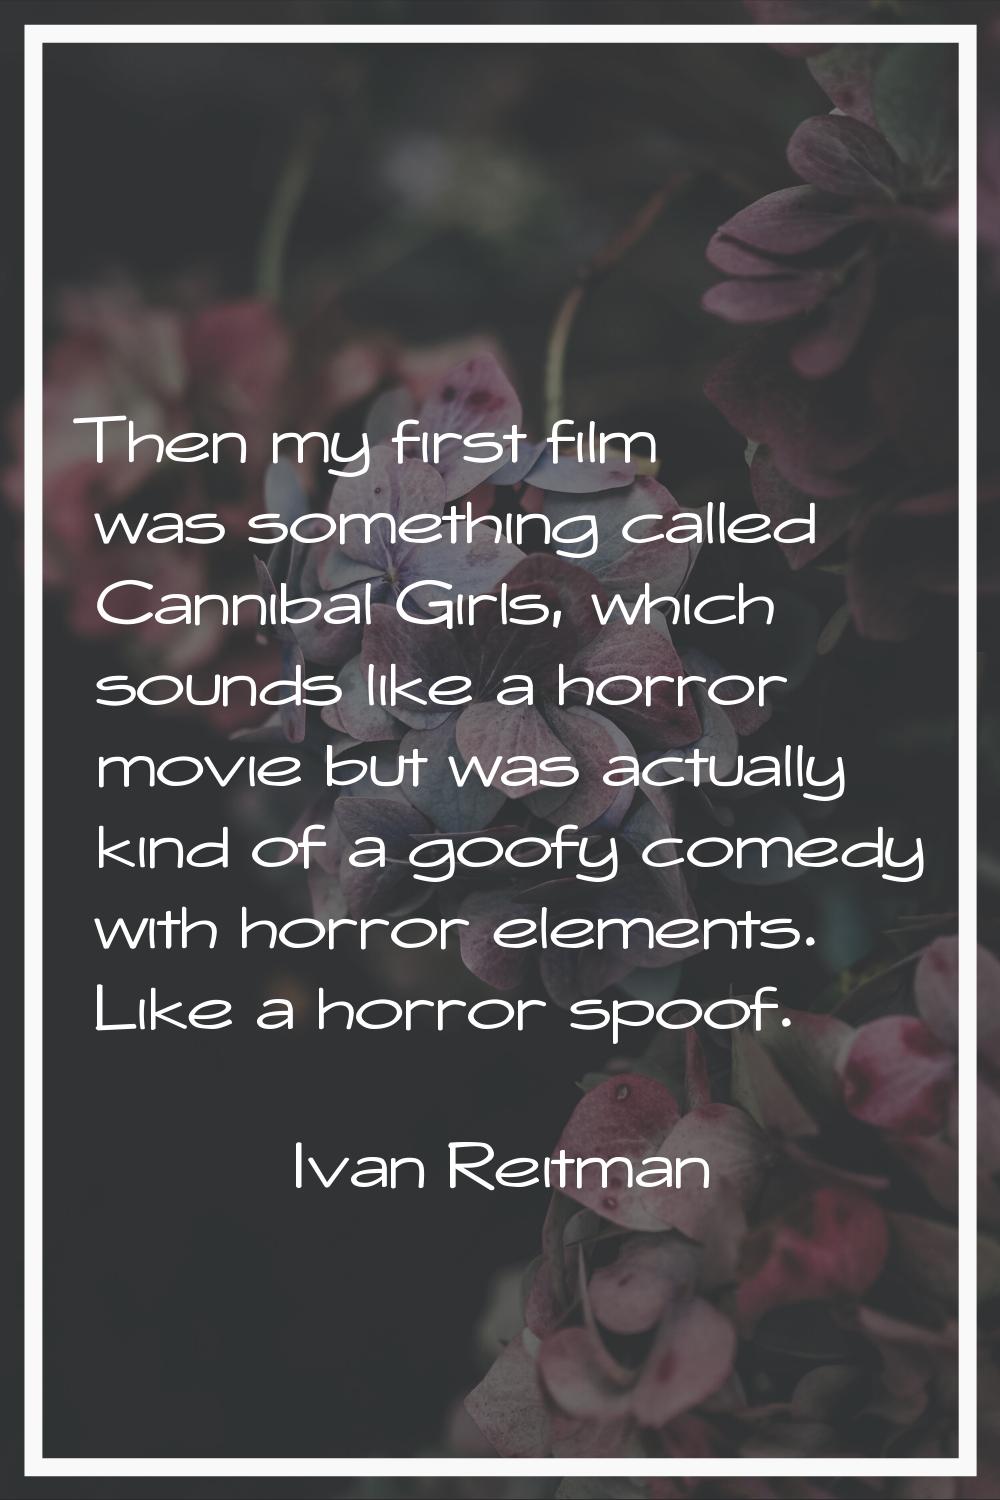 Then my first film was something called Cannibal Girls, which sounds like a horror movie but was ac